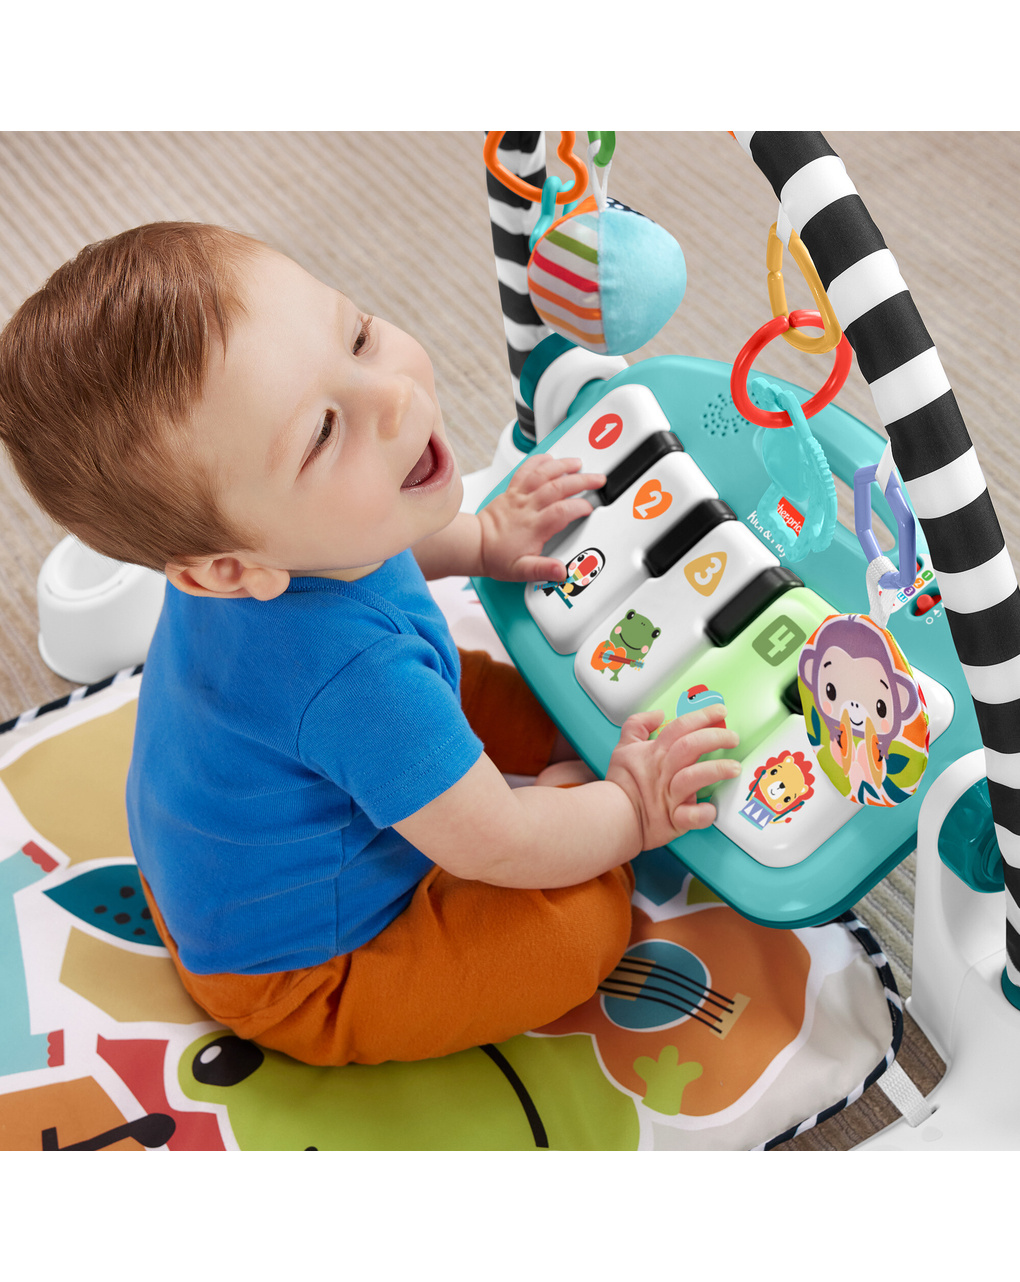 Palestrina smart stages -0m+ - fisher price - Fisher-Price